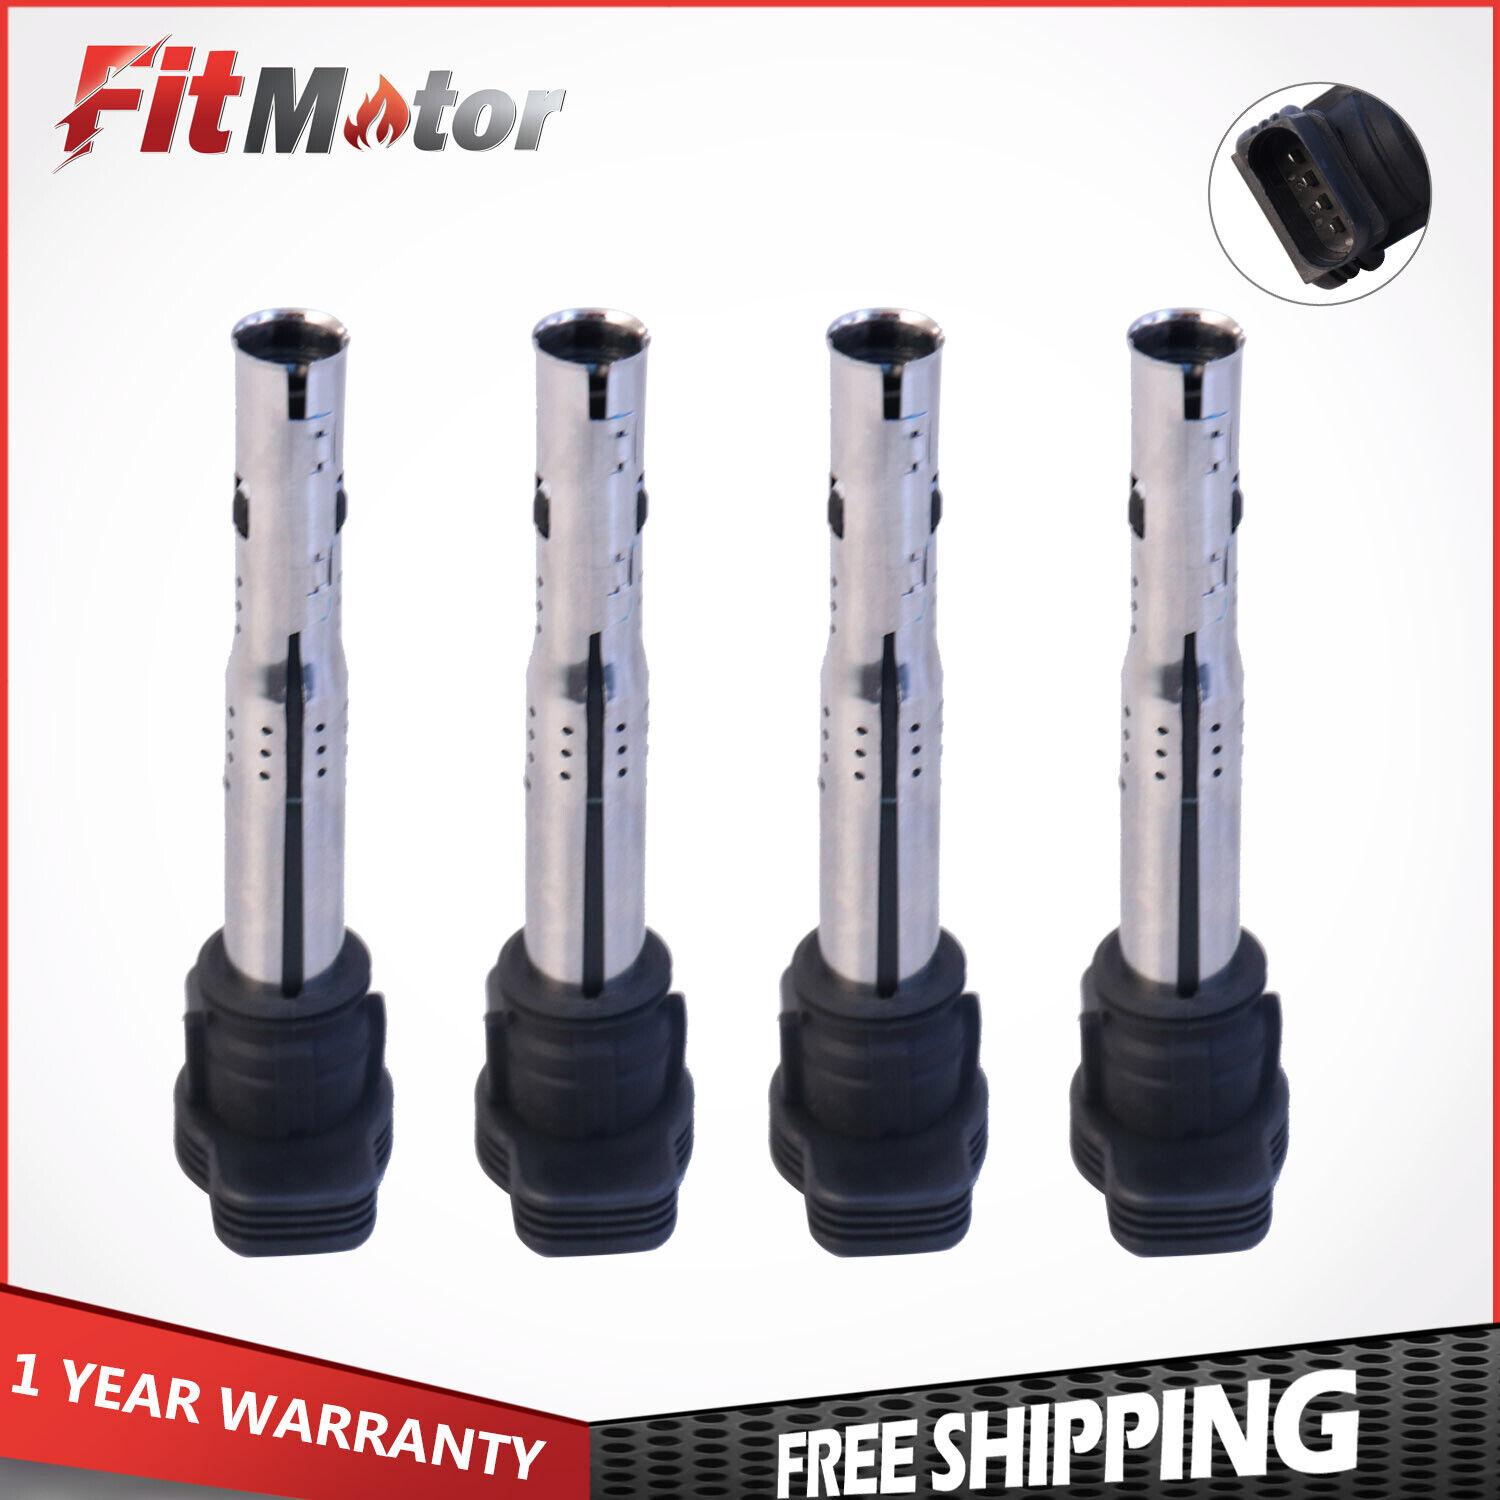 Set of 4 Ignition Coil For VW Beetle Golf Jetta Passat Audi A3 A4 Replaces UF575